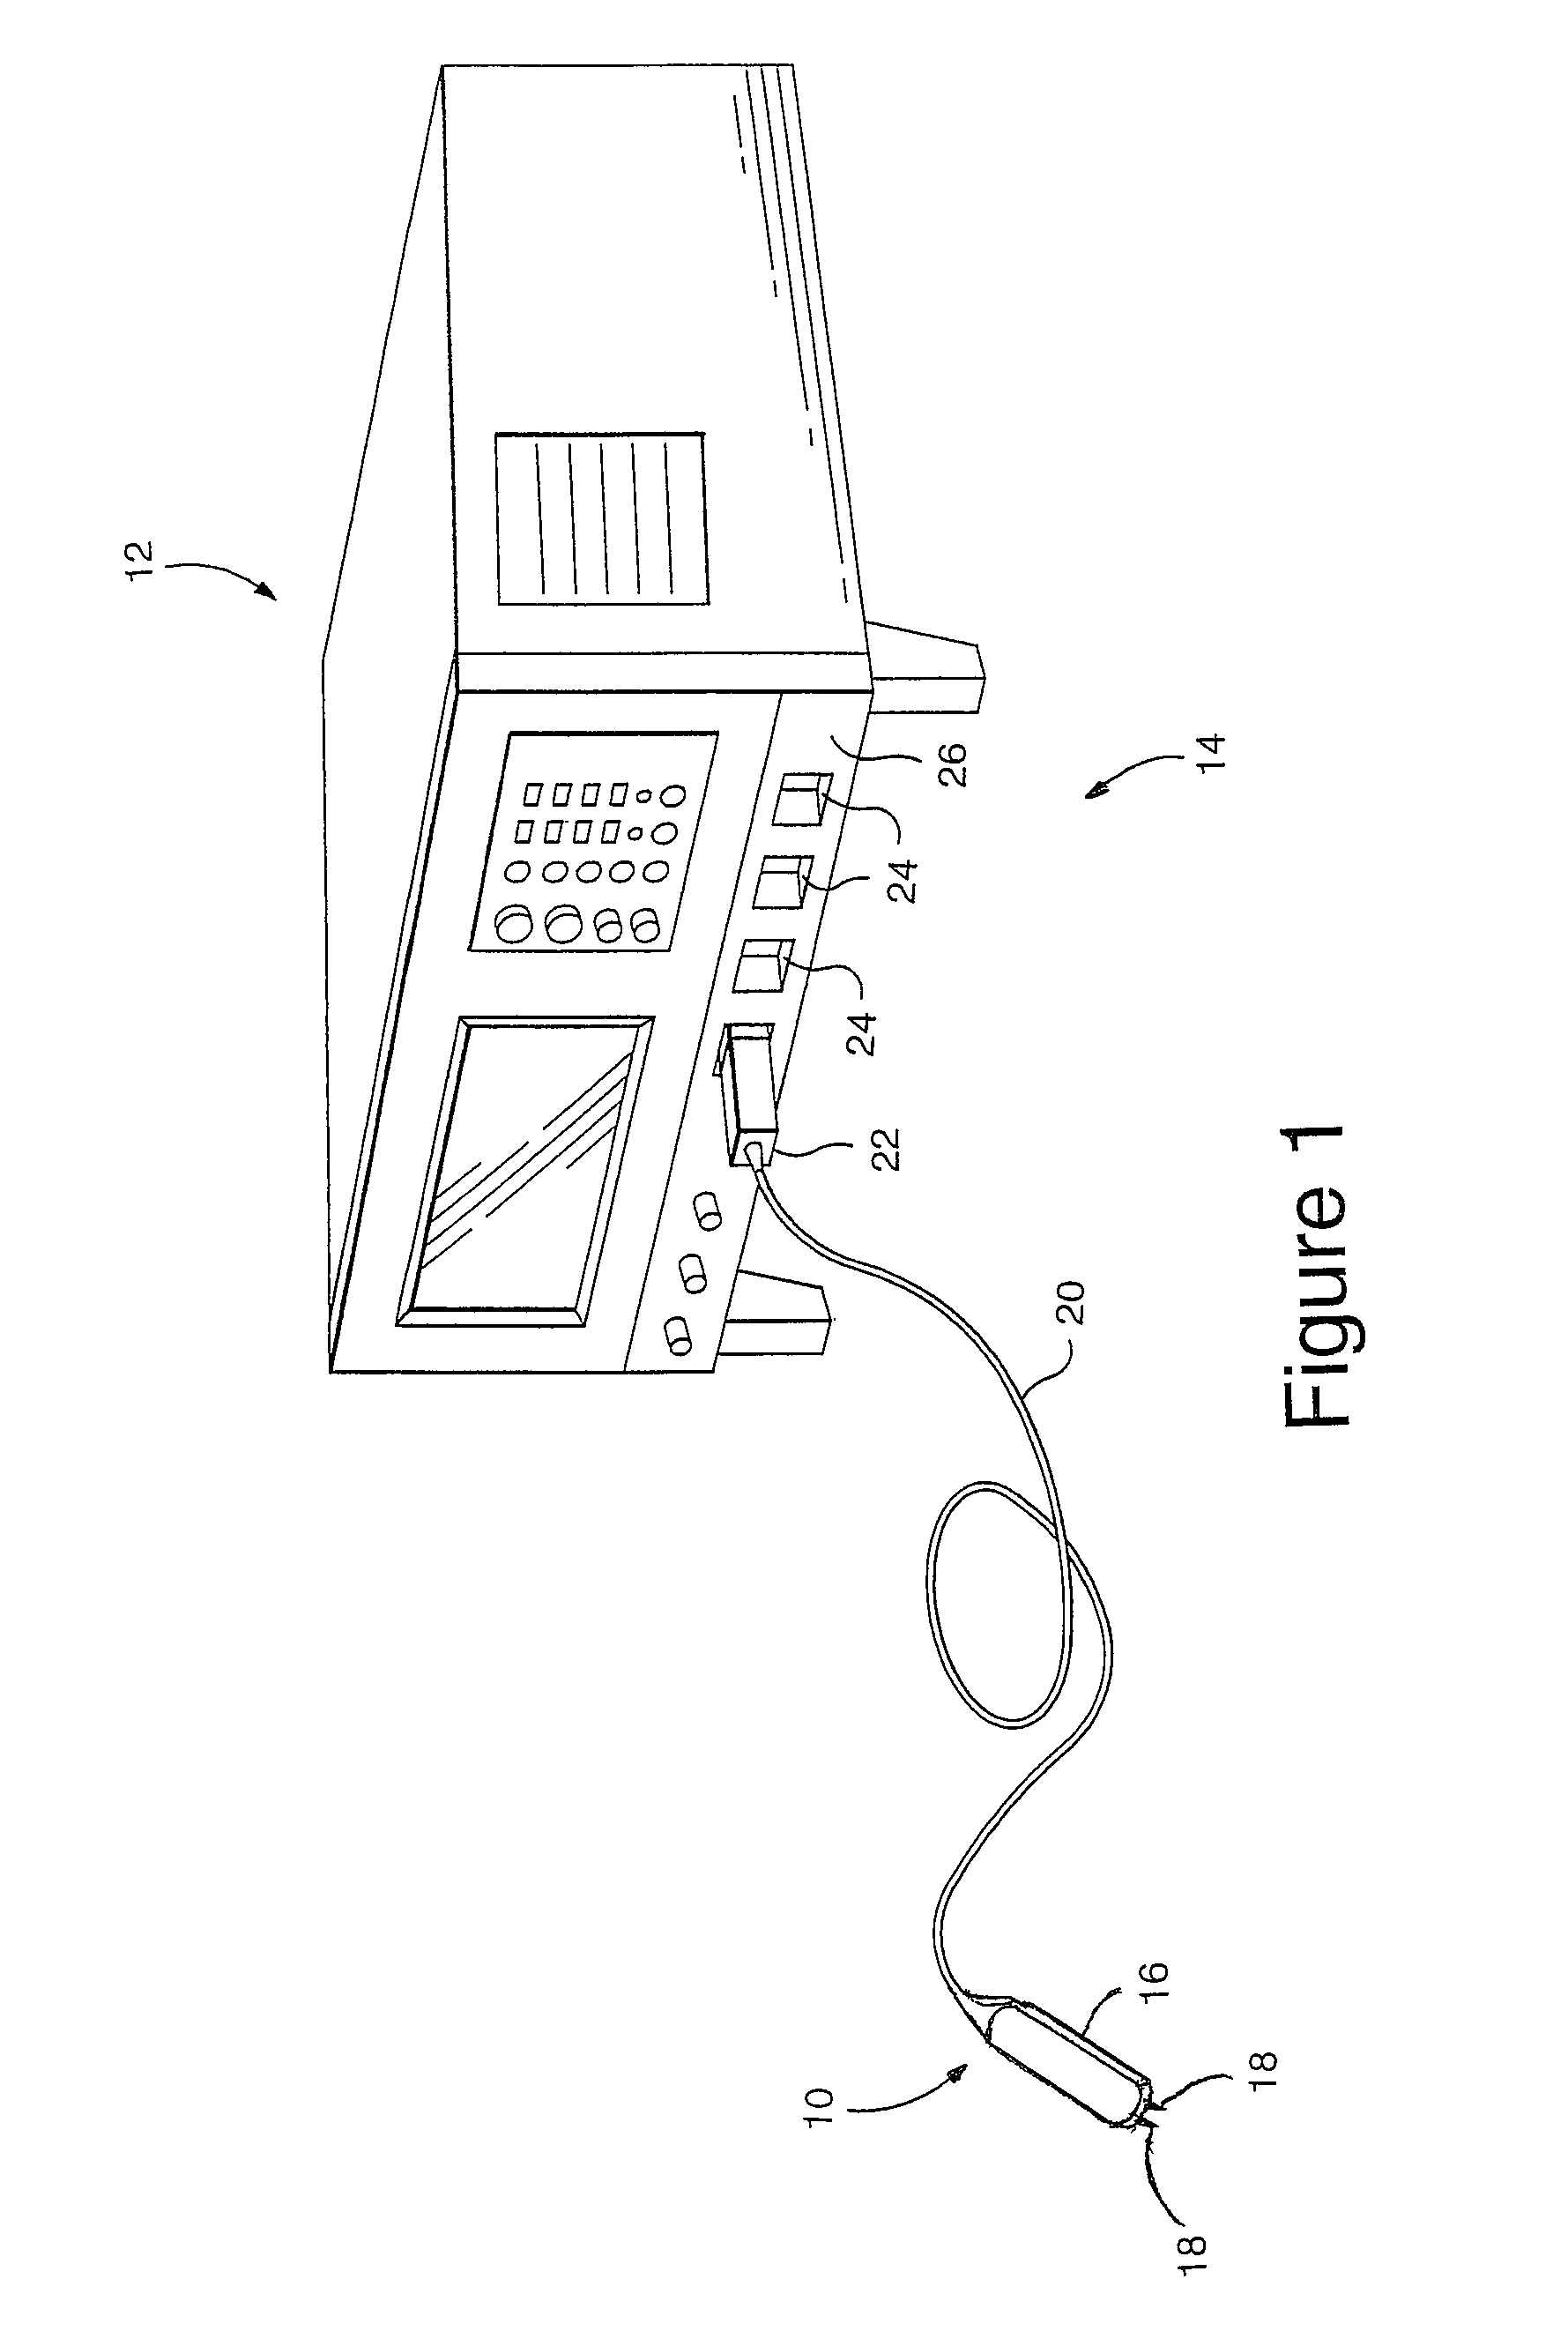 Signal acquisition probe storing compressed or compressed and filtered time domain impulse or step response data for use in a signal measurement system